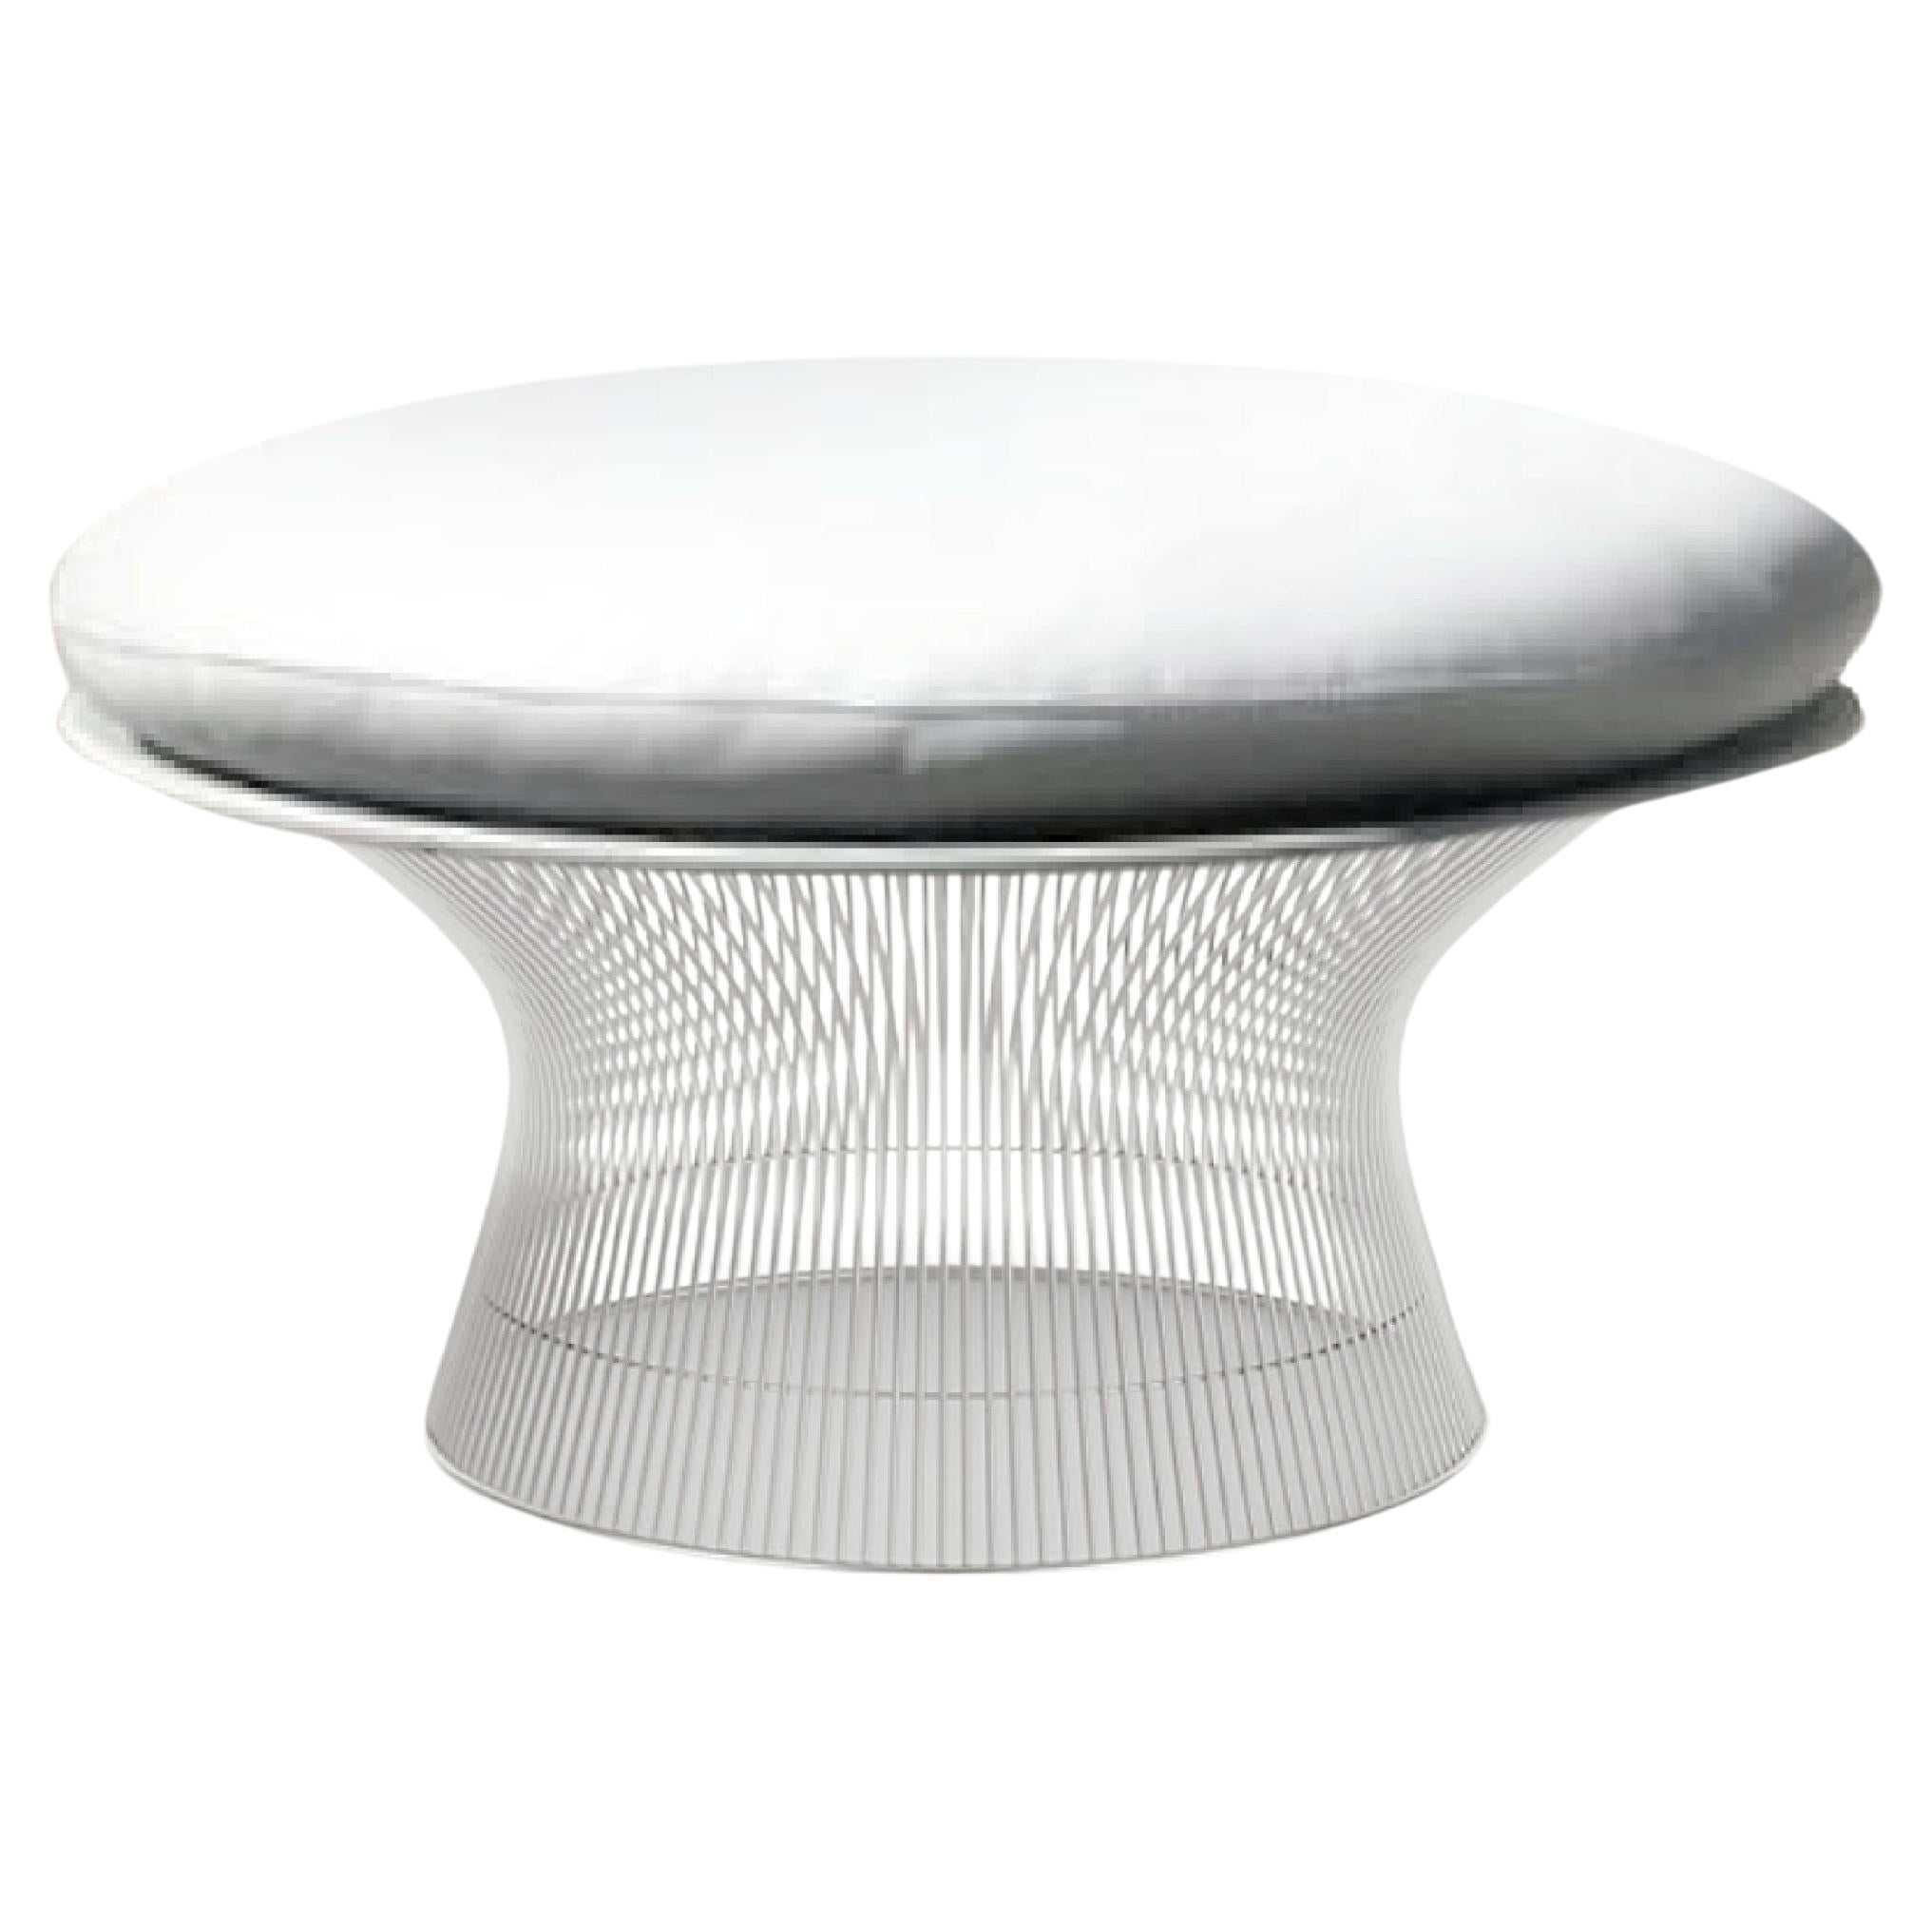 Warren Platner 1705Y Easy Ottoman, Gray Leather and Nickel, Knoll, 1966 For Sale